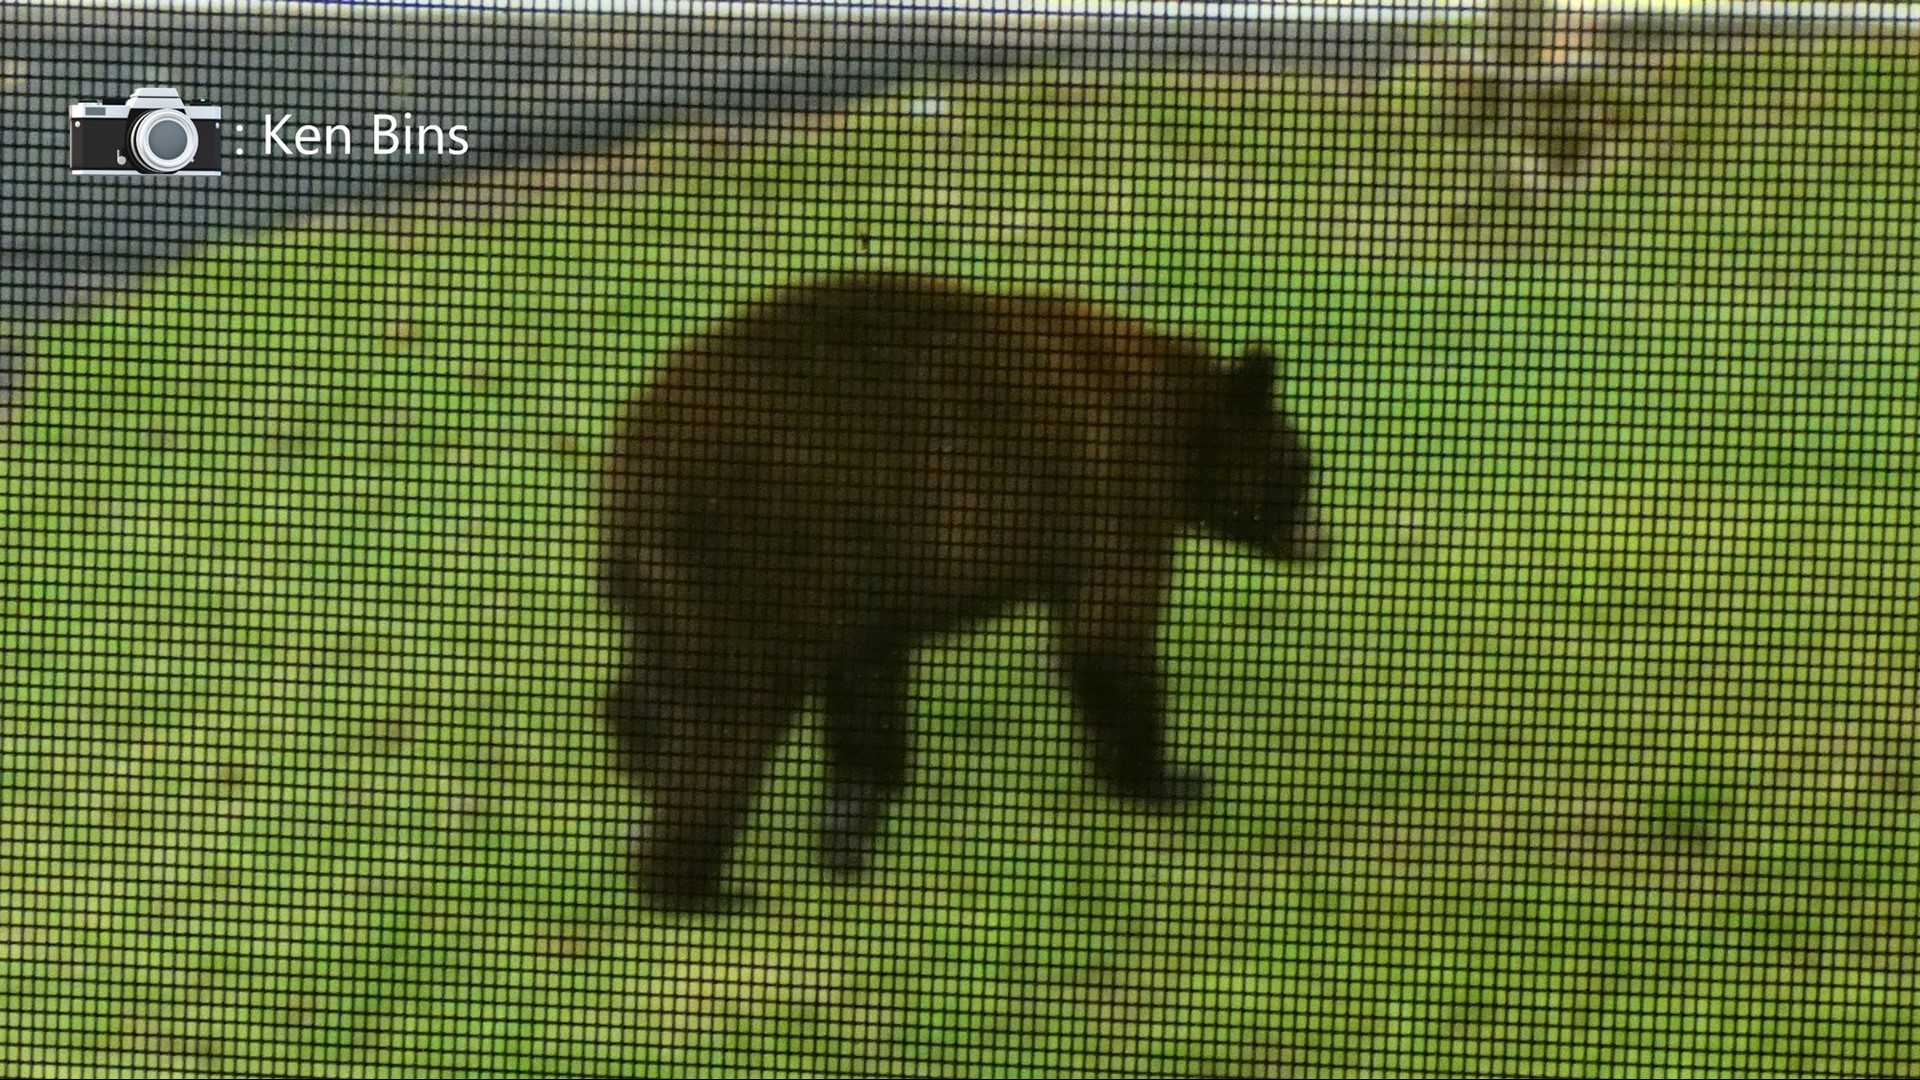 The Missouri State Highway Patrol said a bear was struck and killed Tuesday night on Interstate 55. It comes after an increase in bear sightings in Jefferson County.